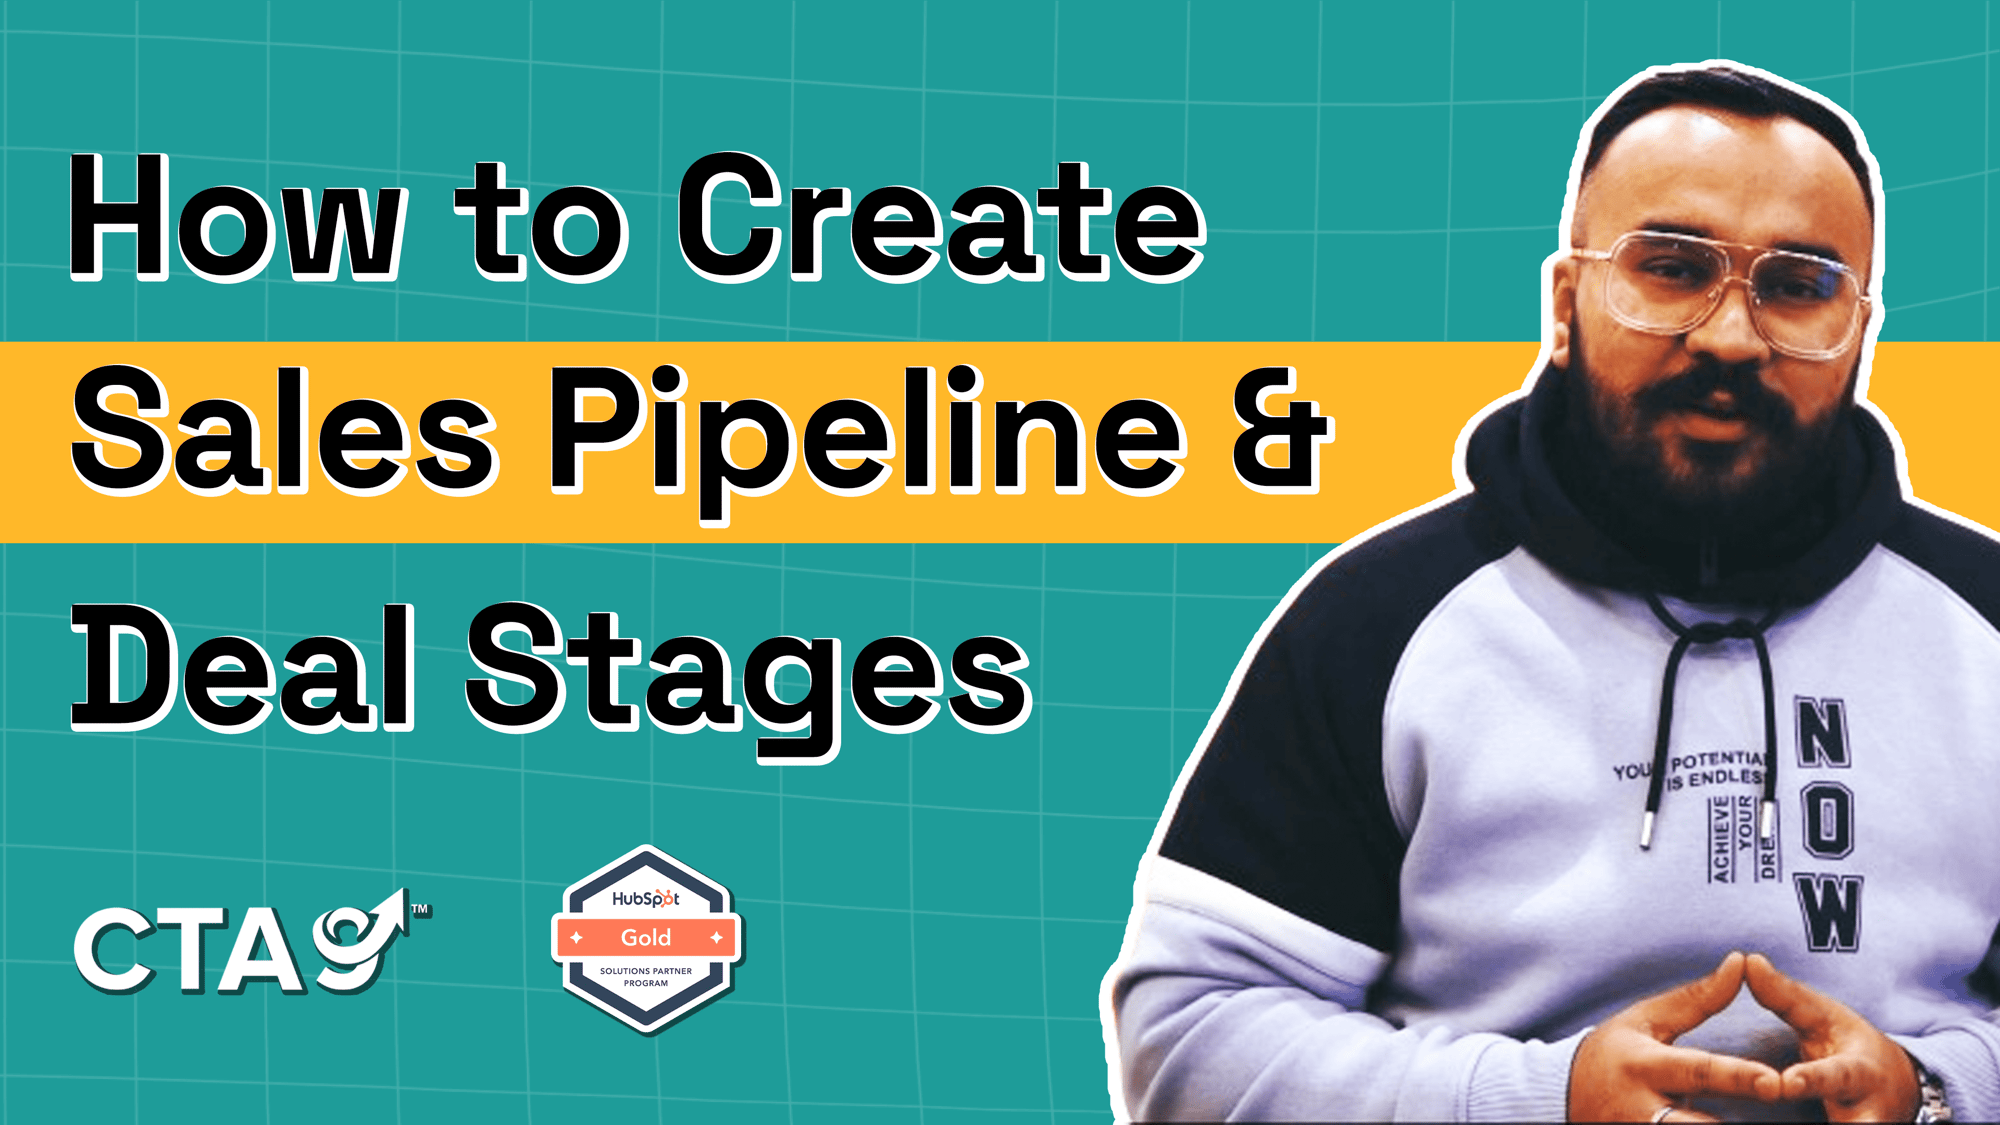 How to Create Sales Pipeline & Deal Stages